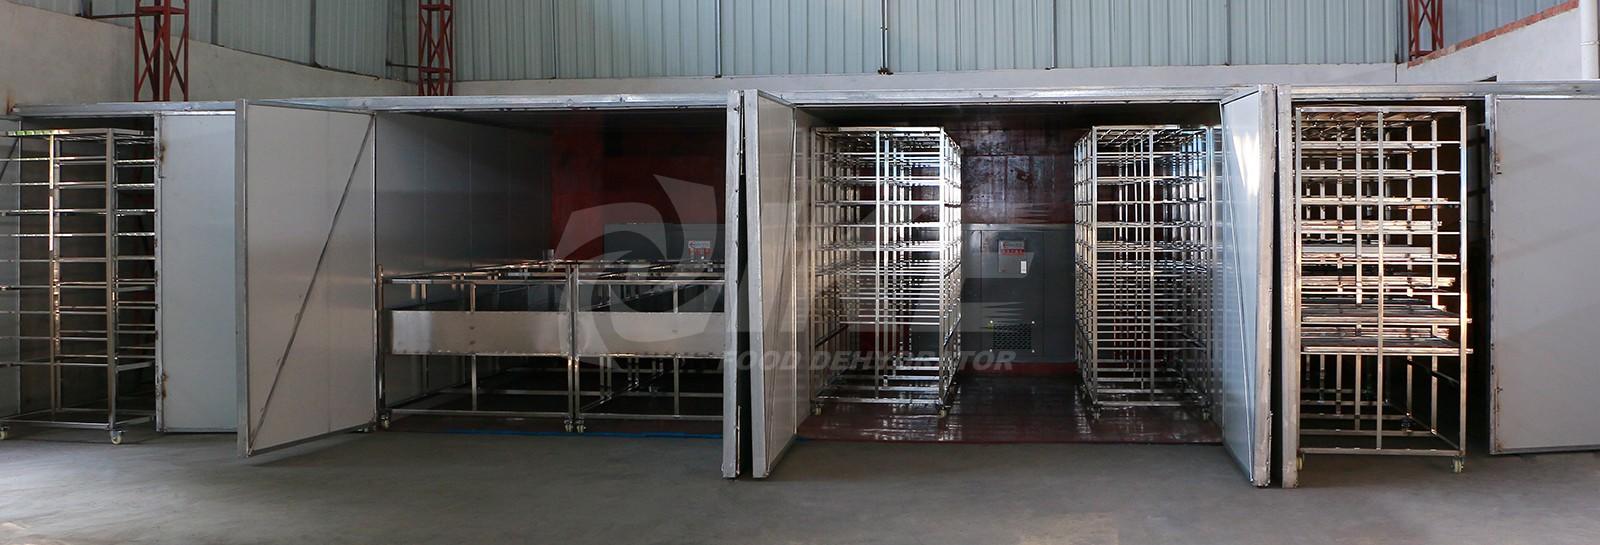 IKE-Find Food Drying Machine Wrh-500a Commercial Middle Temperature Electric